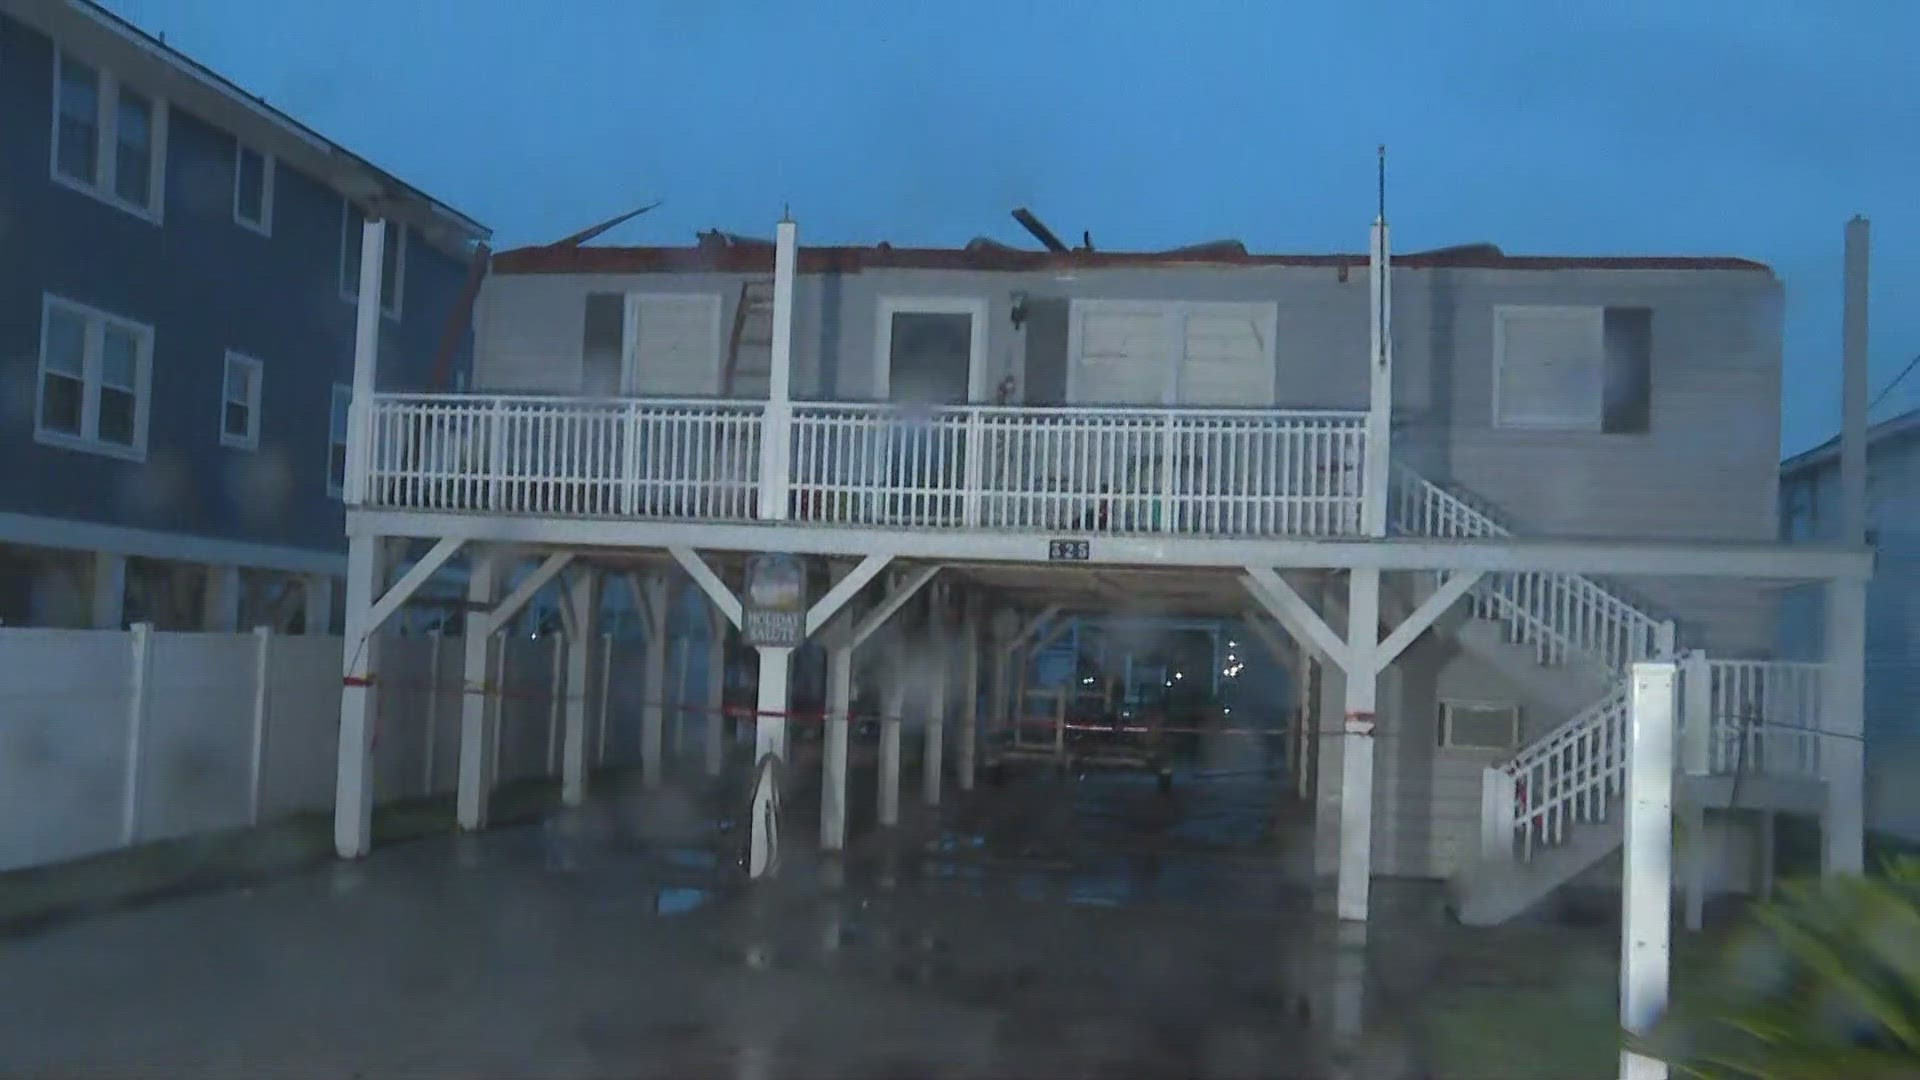 Tropical storm Idalia produced a likely tornado in the Cherry Grove area of Myrtle Beach, SC. Here’s a look at the damage.